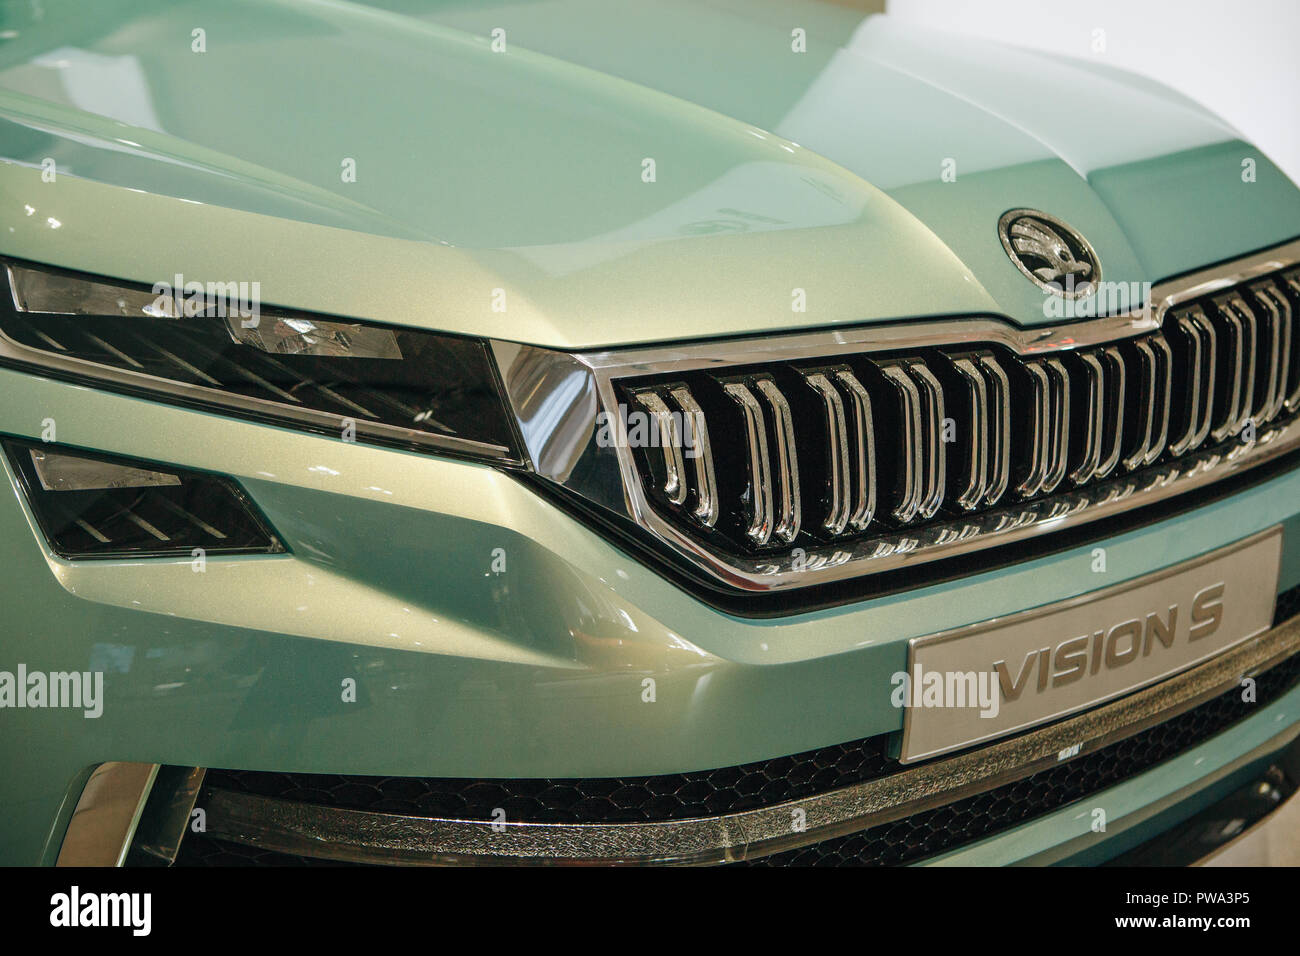 Berlin, August 29, 2018: Close-up front part of a new car Skoda Vision S. Stock Photo